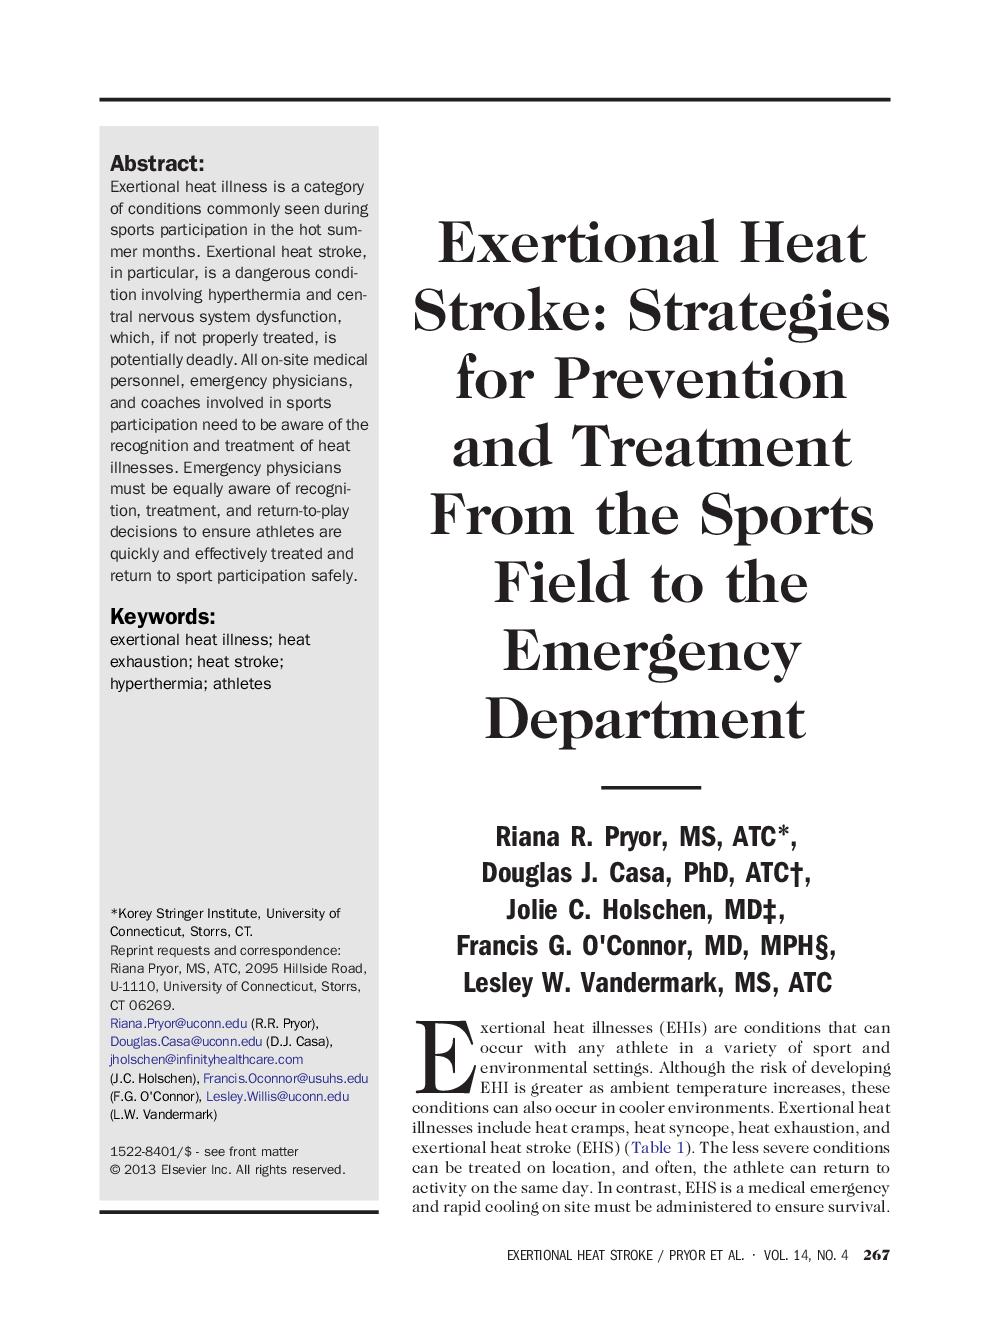 Exertional Heat Stroke: Strategies for Prevention and Treatment From the Sports Field to the Emergency Department 